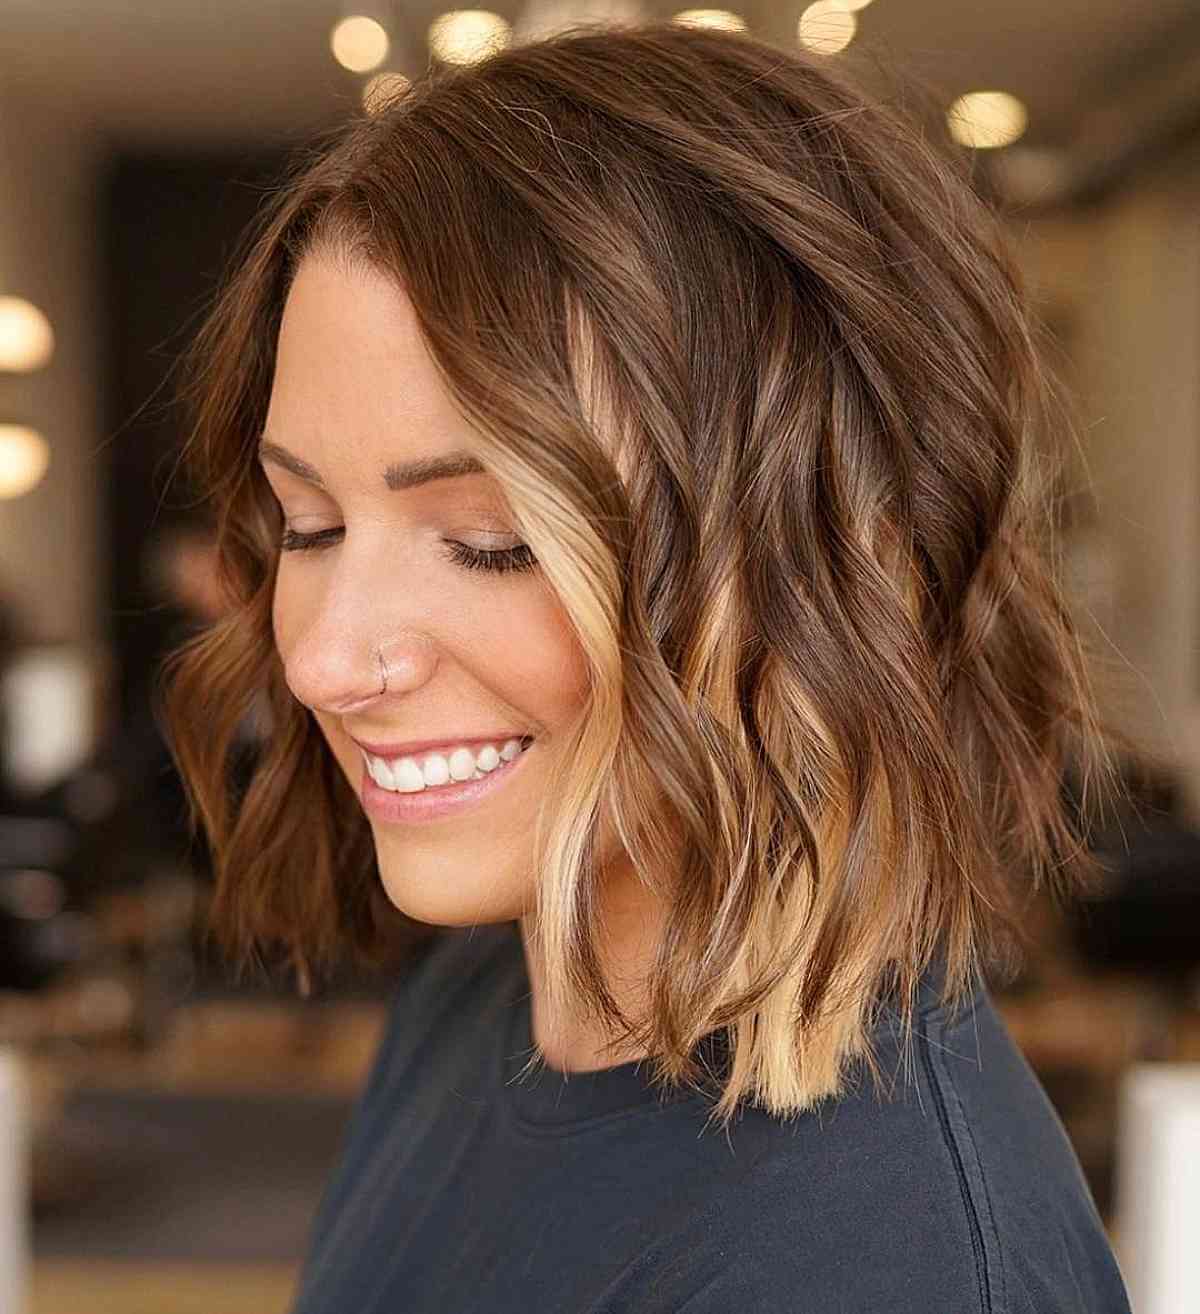 23 Short, Light Brown Hair Ideas to Inspire Your Next Cut & Color